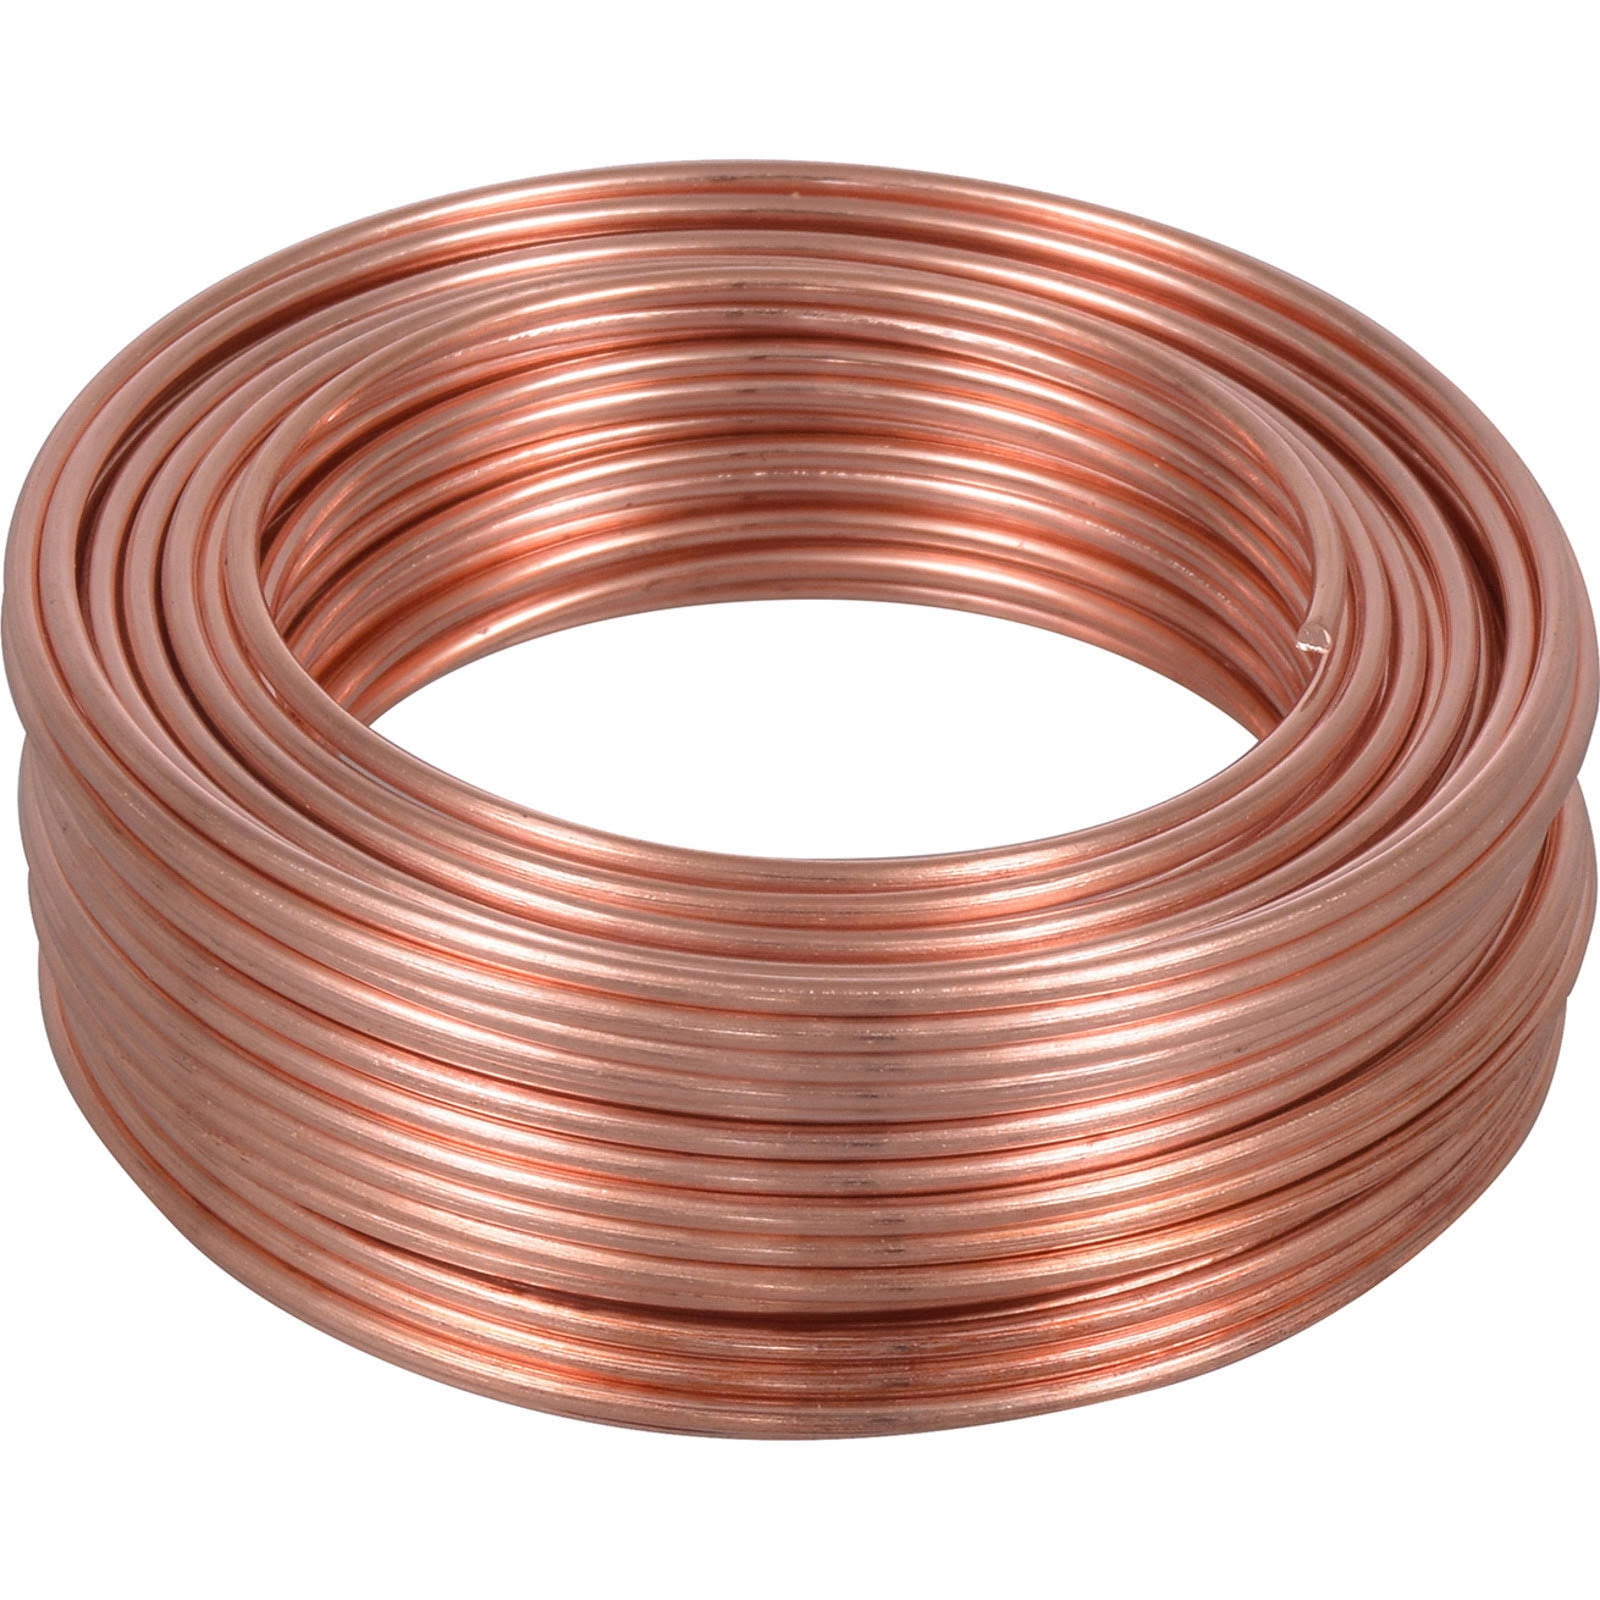 33' Thick Gauge Hanging Wire (Copper)